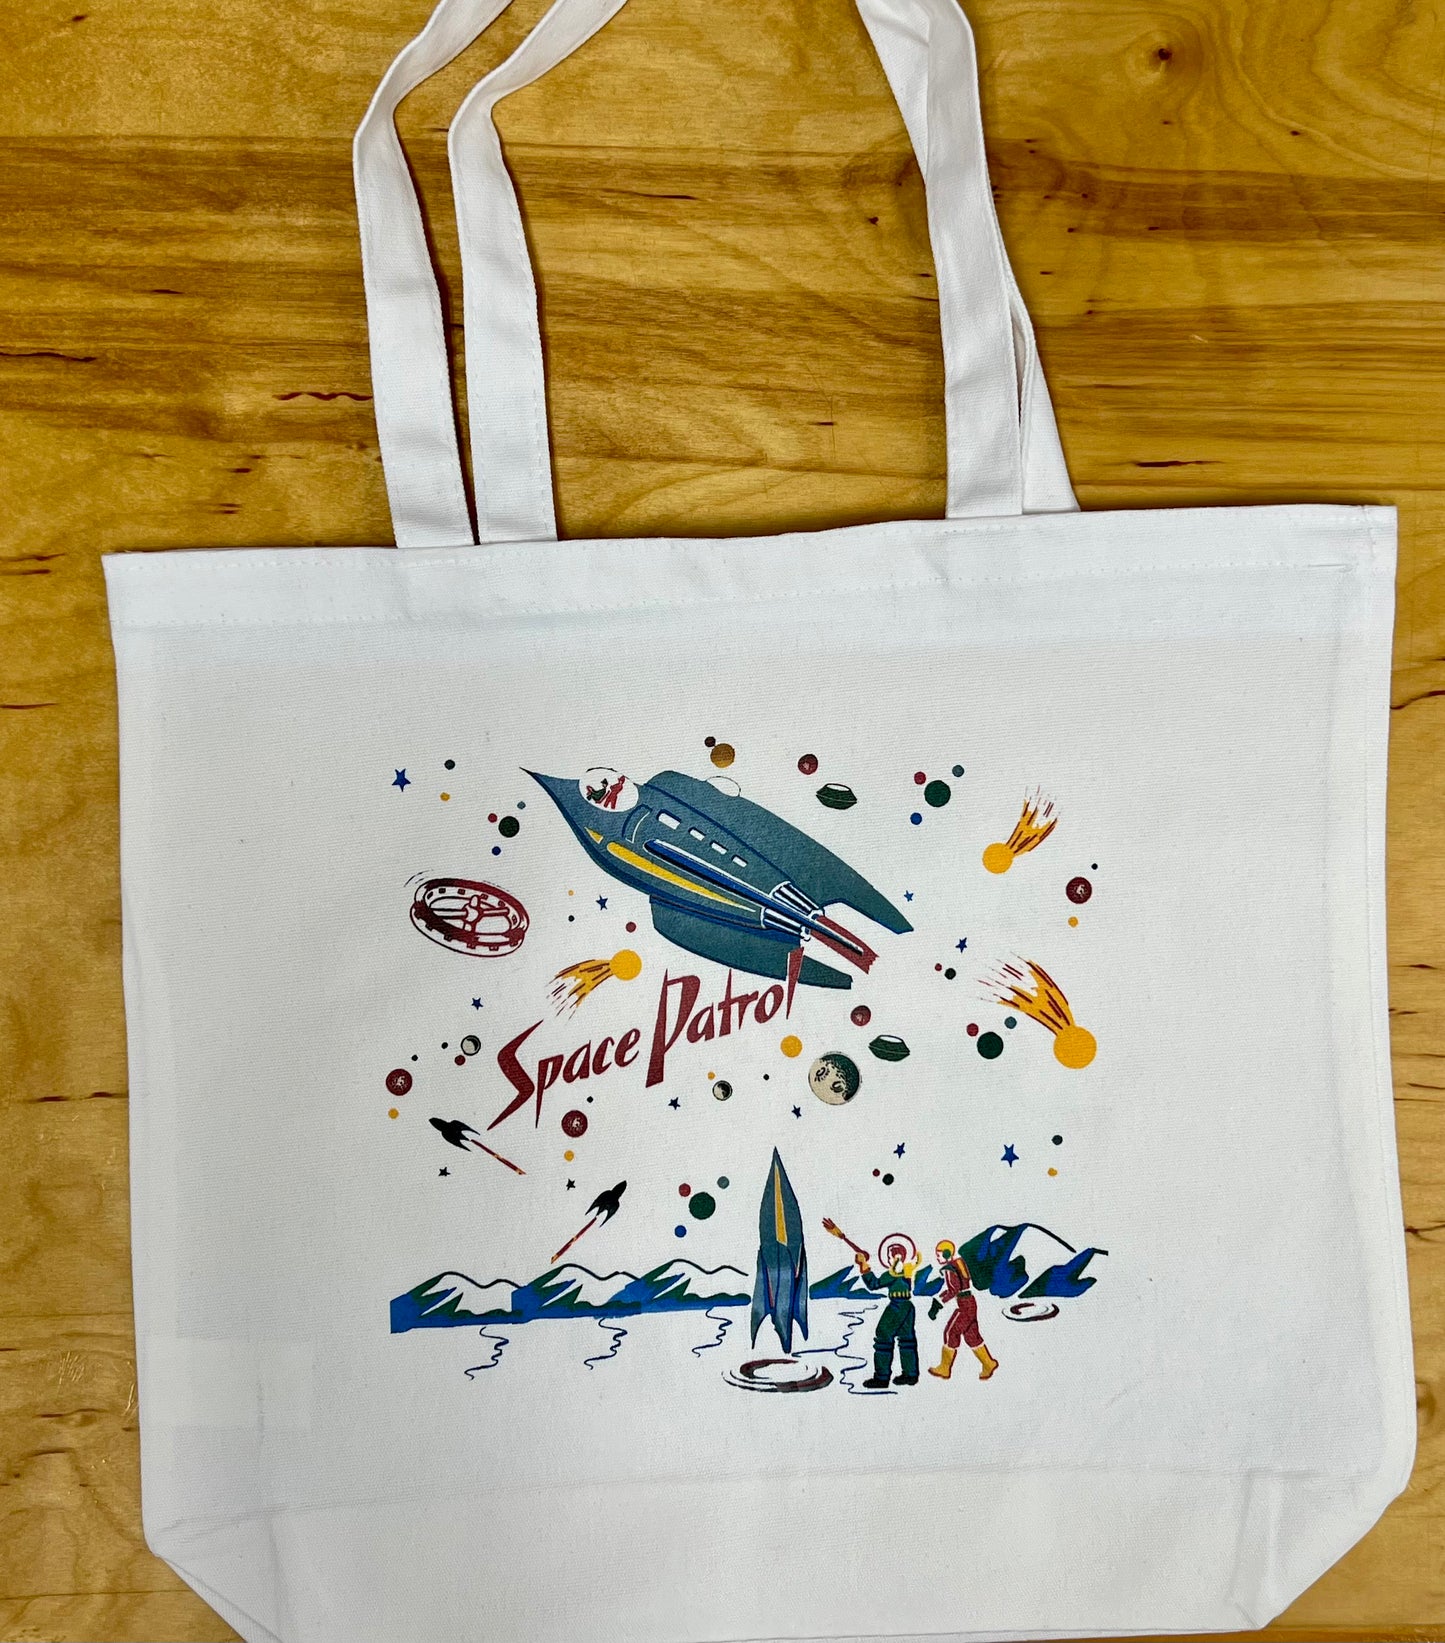 Space Patrol Carry-All Tote